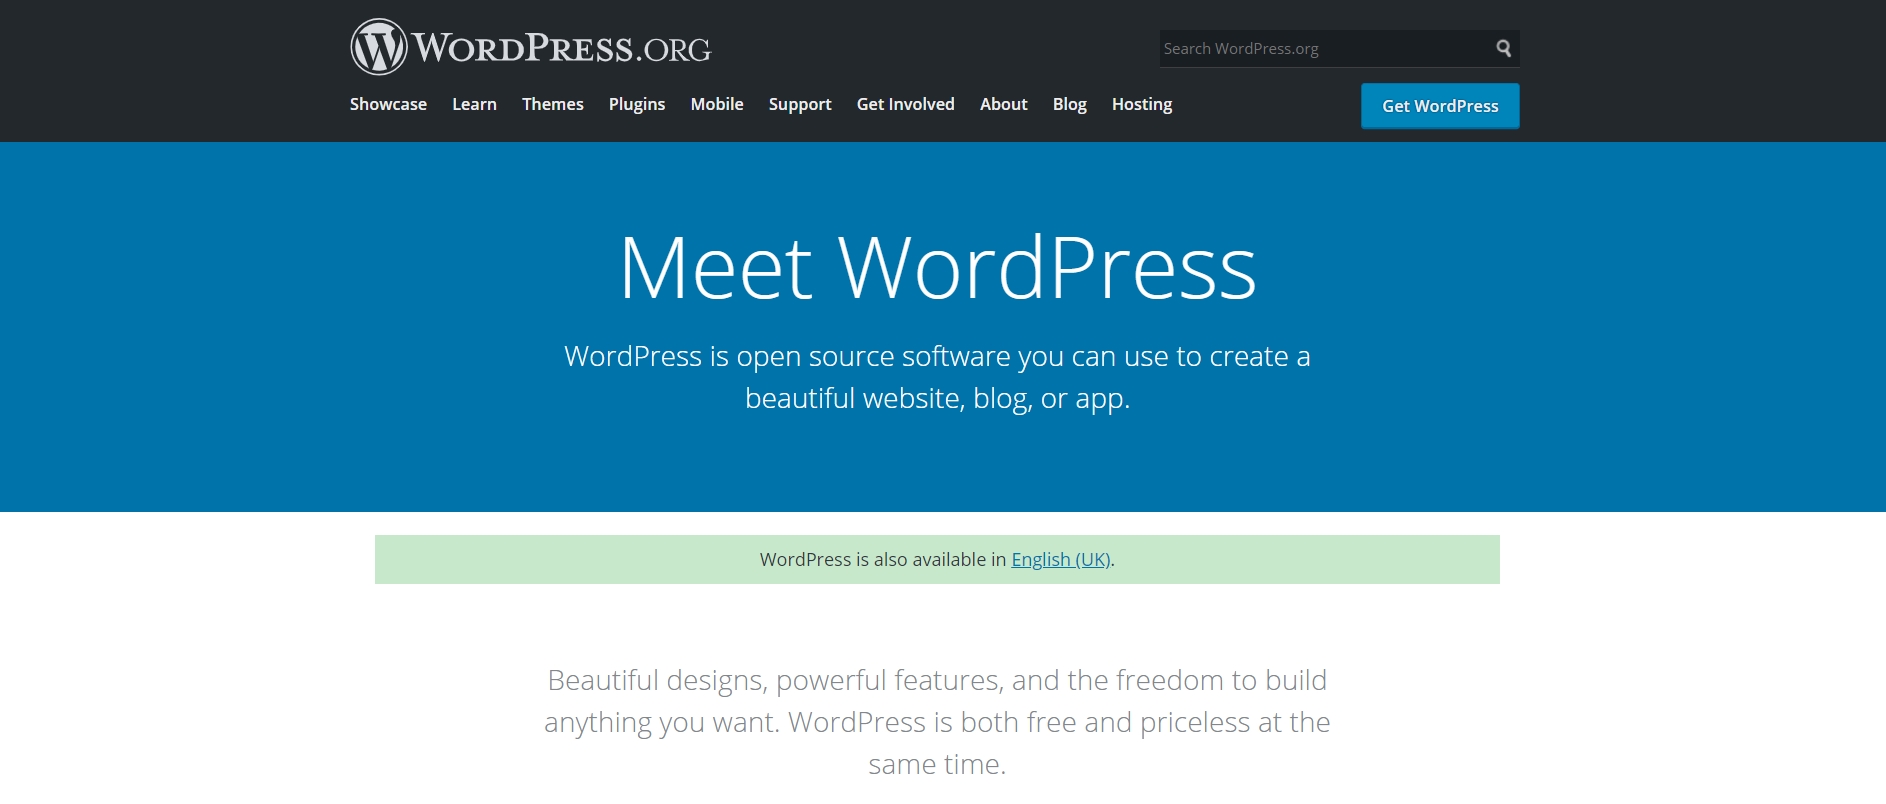 Wordpress.org - The Ultimate Content Management System